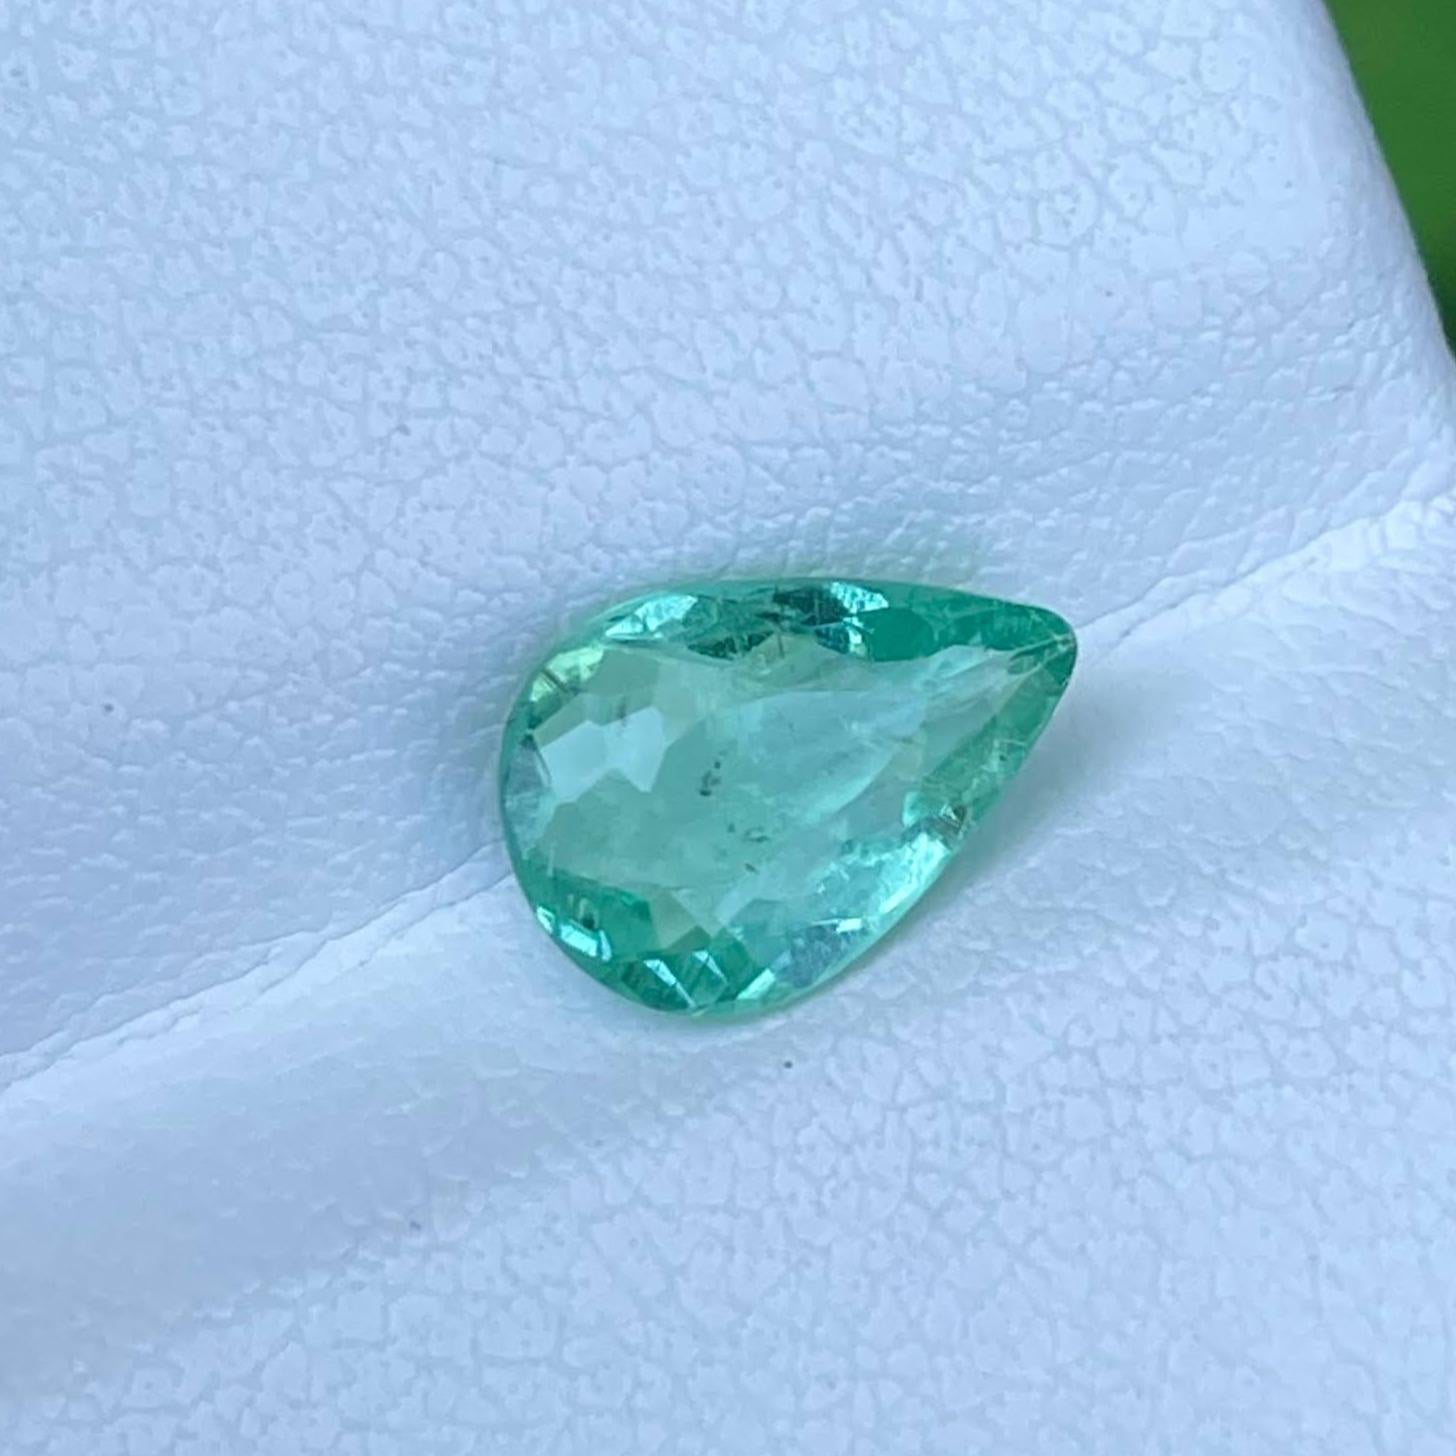 Women's or Men's 1.21 carats Paraiba Loose Tourmaline Pear Cut Natural Gemstone from Mozambique